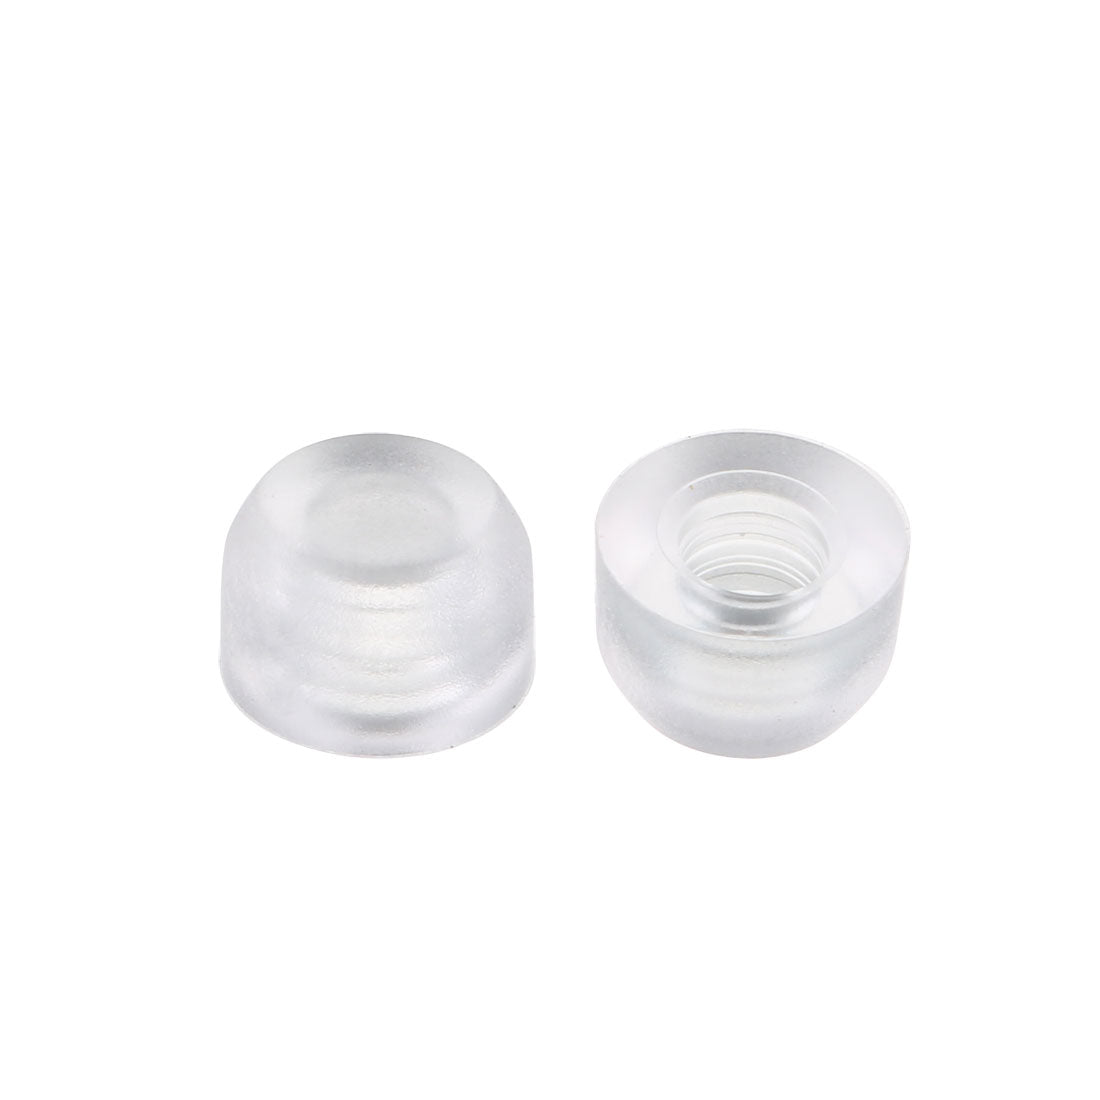 uxcell Uxcell 20pcs 3mm Hole Dia Plastic Pushbutton Tactile Switch Caps Cover Keycaps Protector Transparent for 6x6 Tact Switch